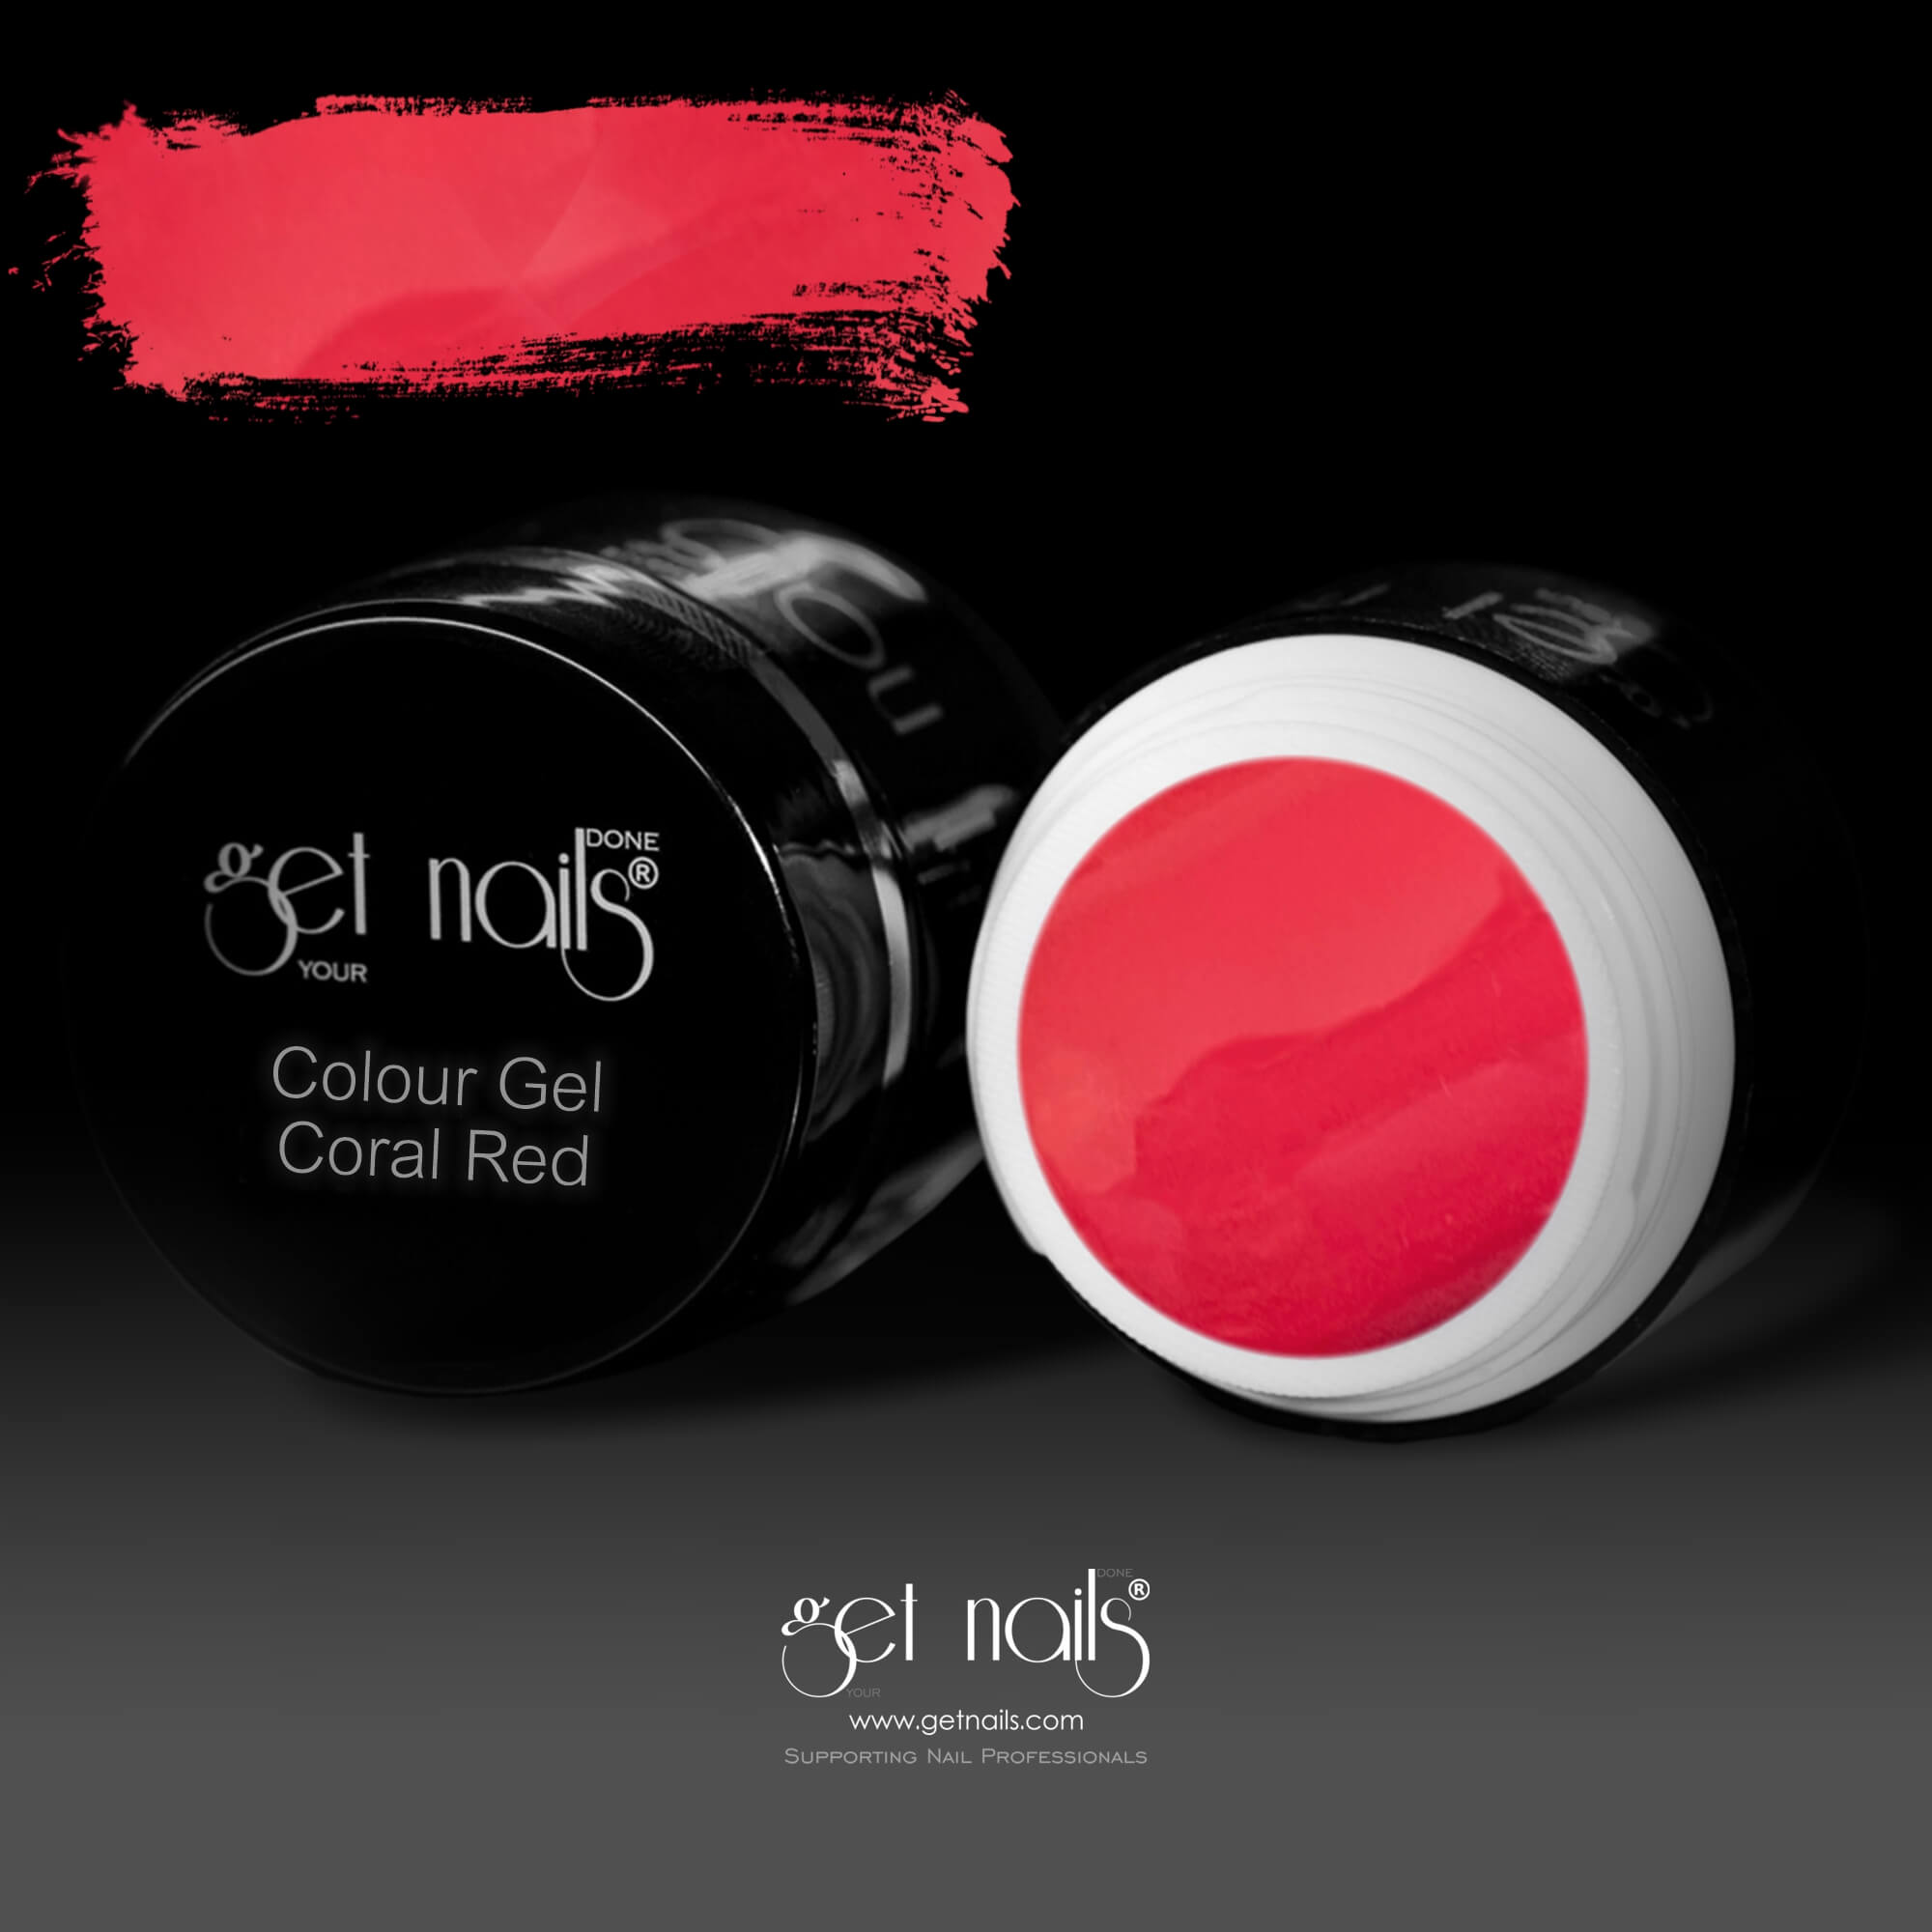 Get Nails Austria - Gel colorato Coral Red 5g